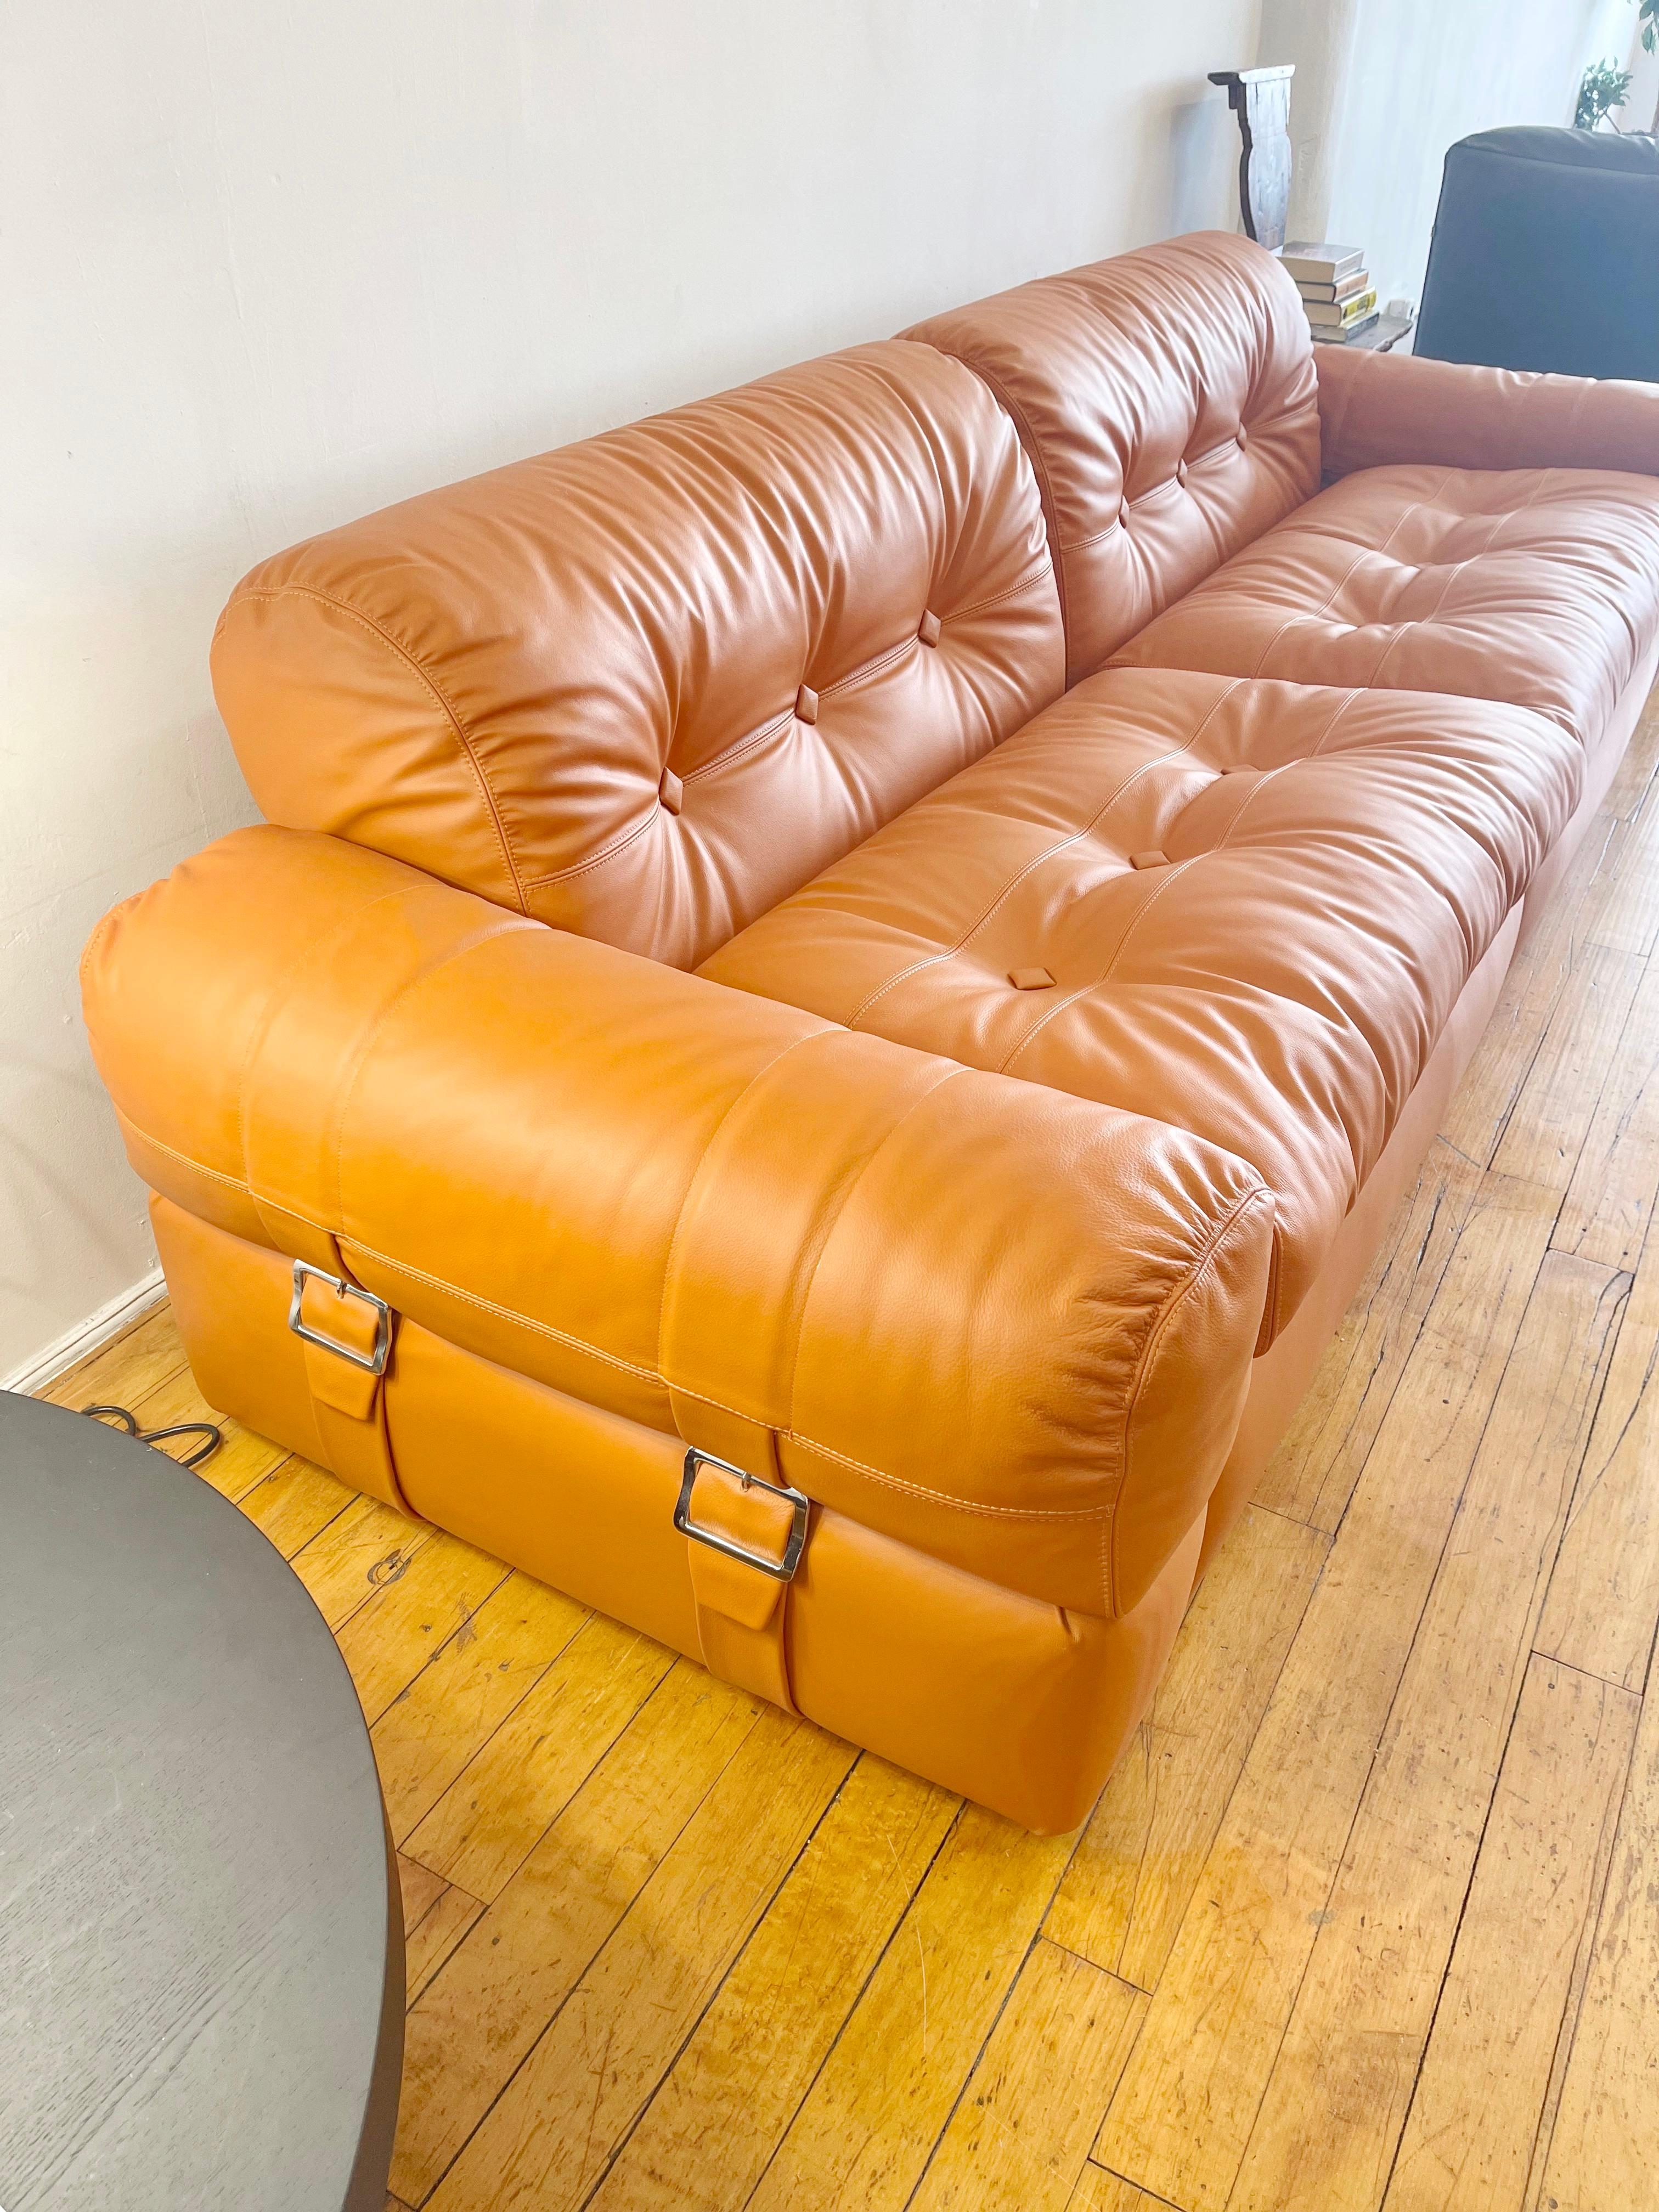 Adriano Piazzesi 1970s Sofa Newly Upholstered with Copper Brown Italian Leather For Sale 13